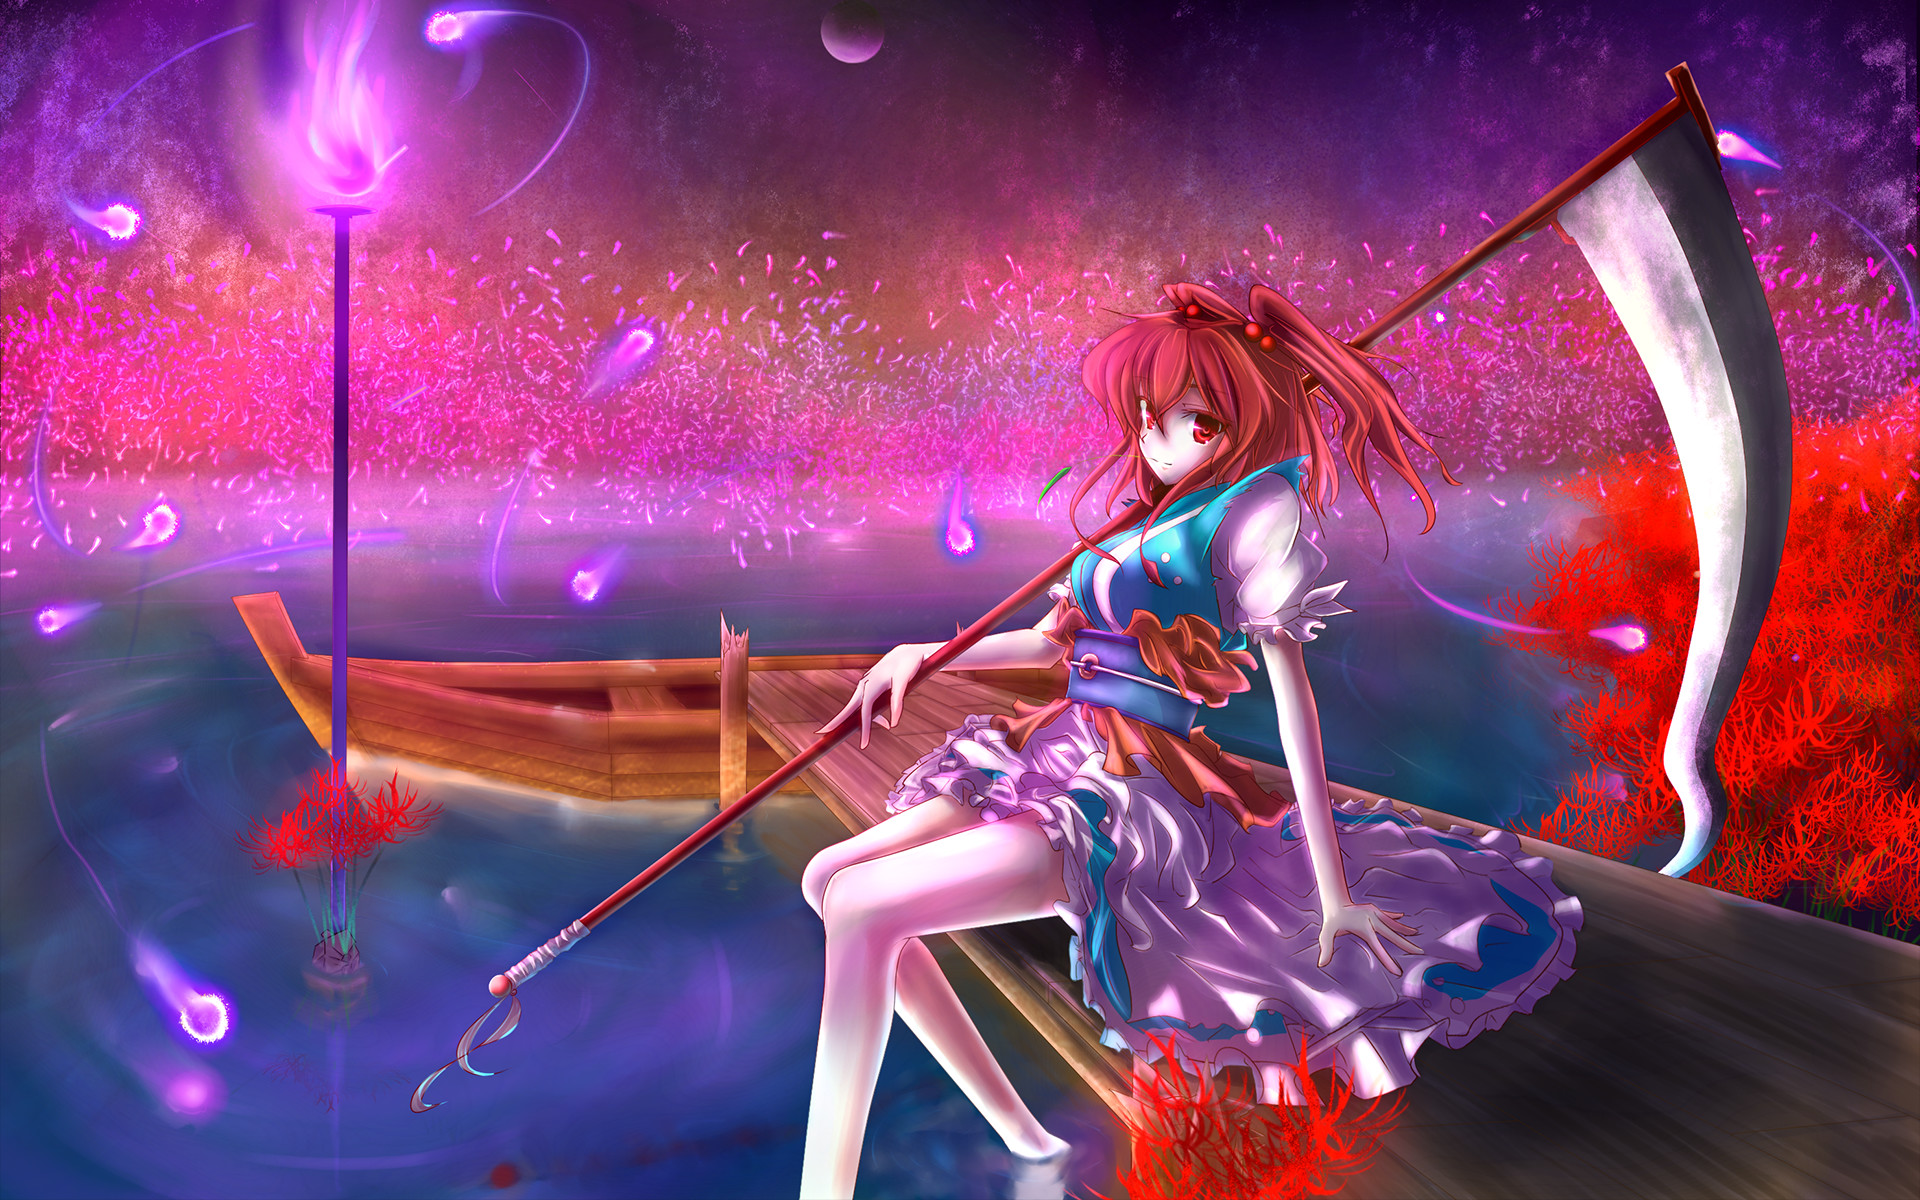 125 Touhou wallpapers all are in good taste, most are epic. If youre looking for lewd pictures keep hitting